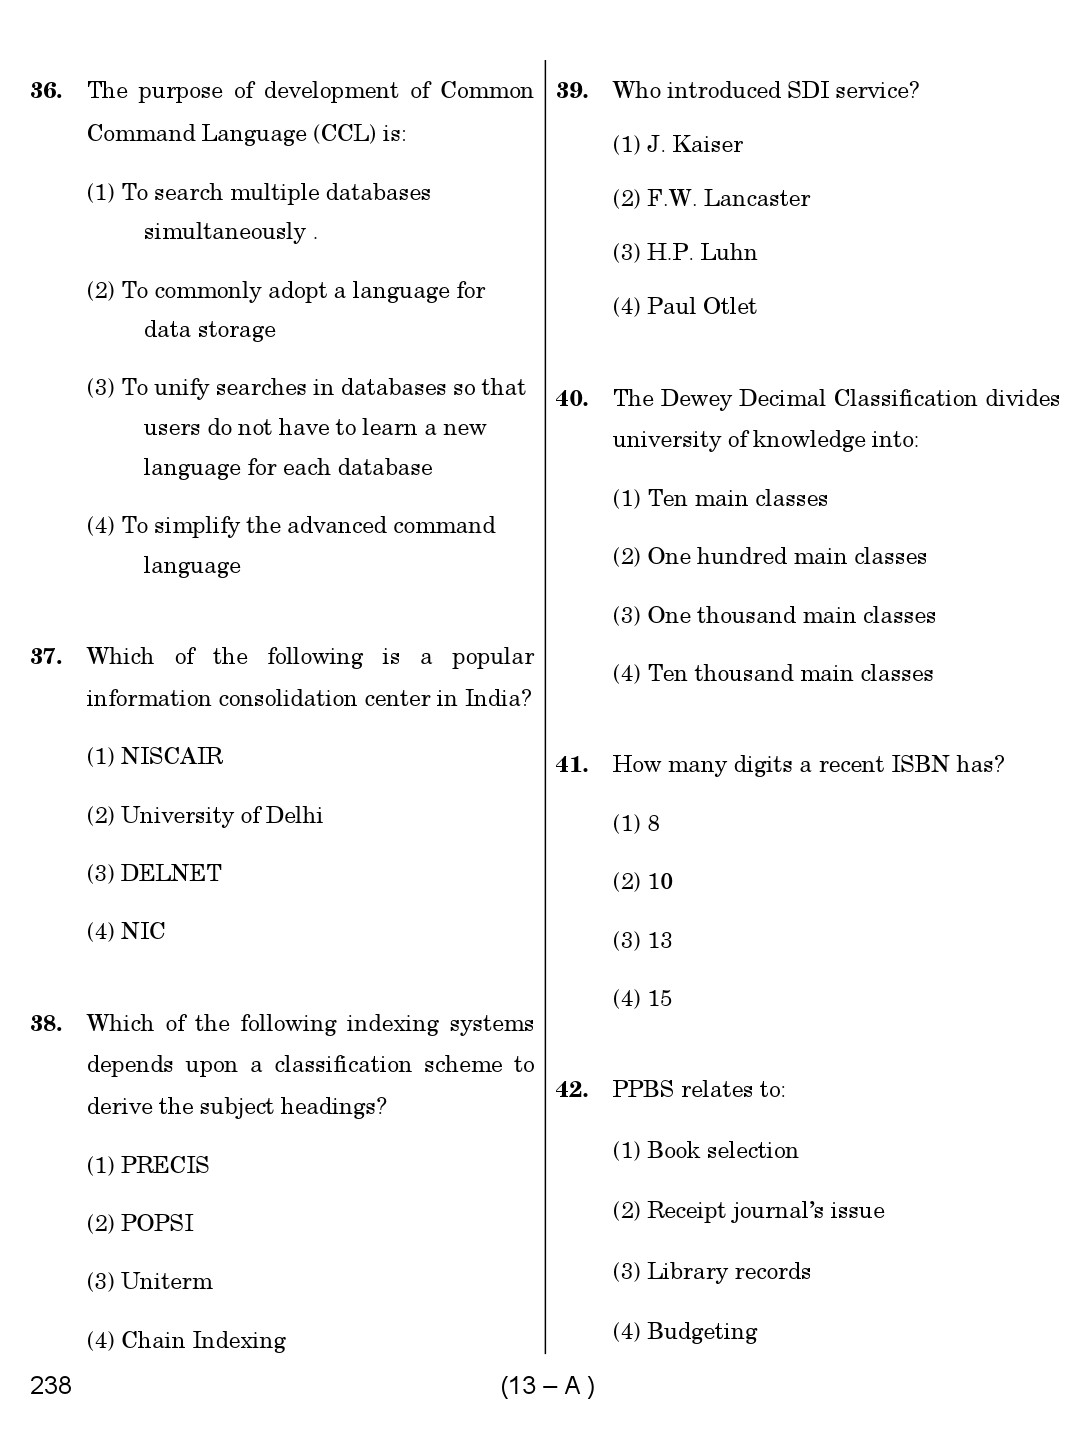 Karnataka PSC 238 Specific Paper II Librarian Exam Sample Question Paper 13